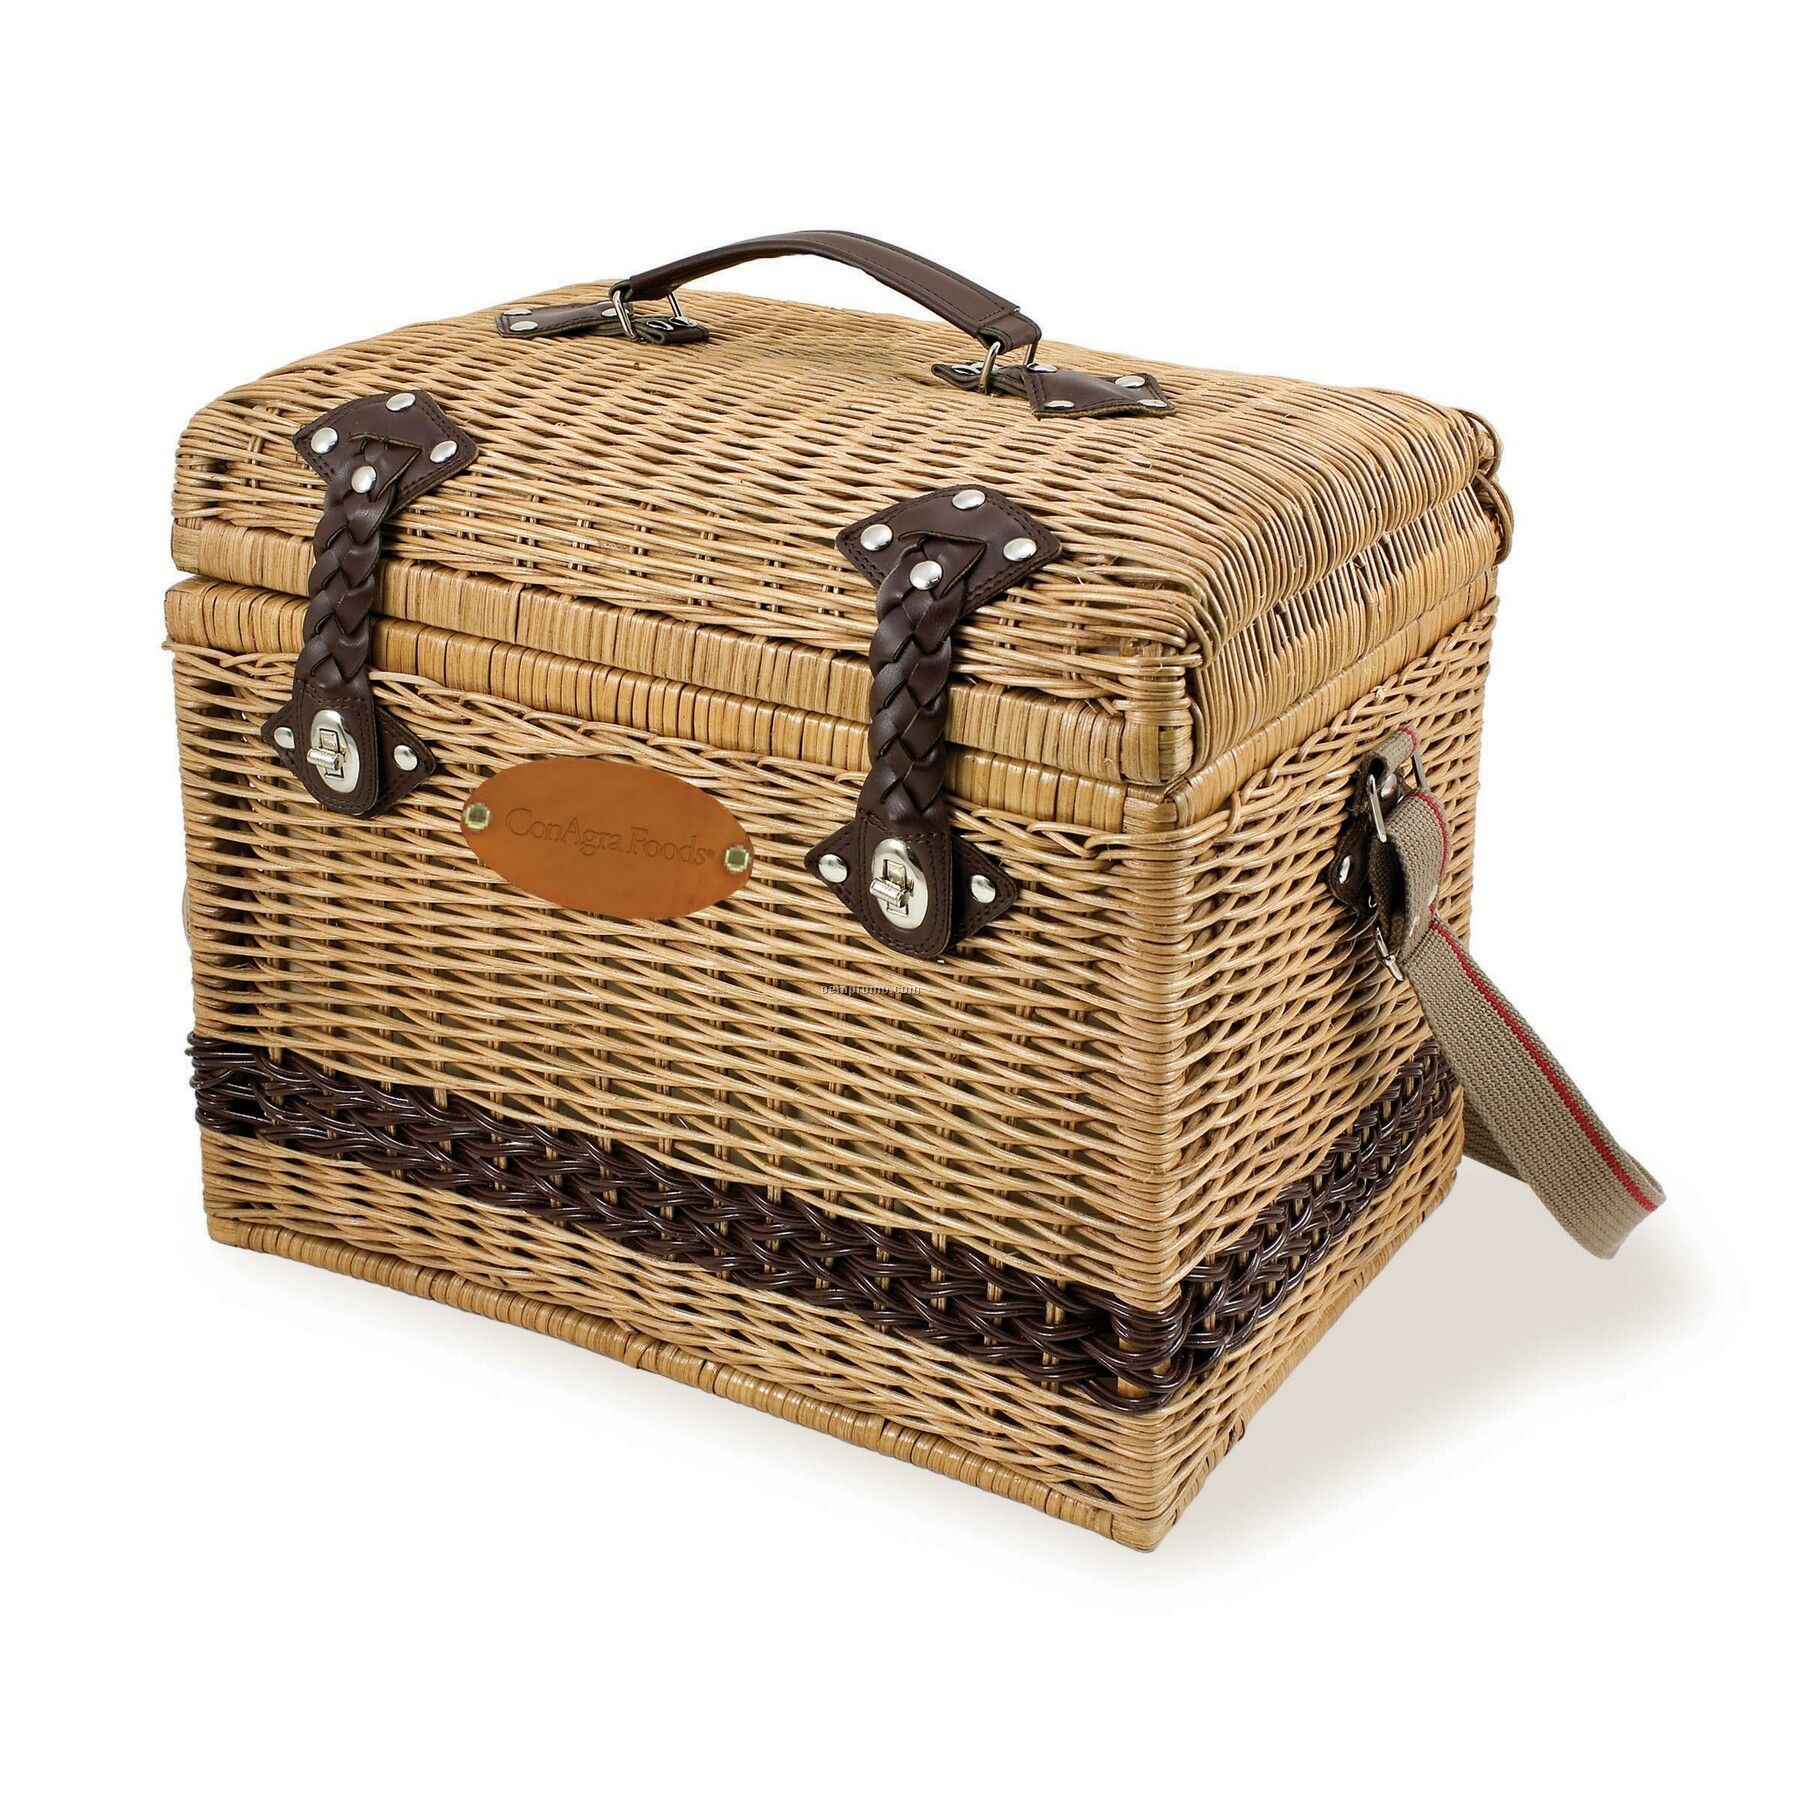 Yellowstone - Moka Deluxe 15" Picnic Basket W/ Service For 2 (Dot Accents)